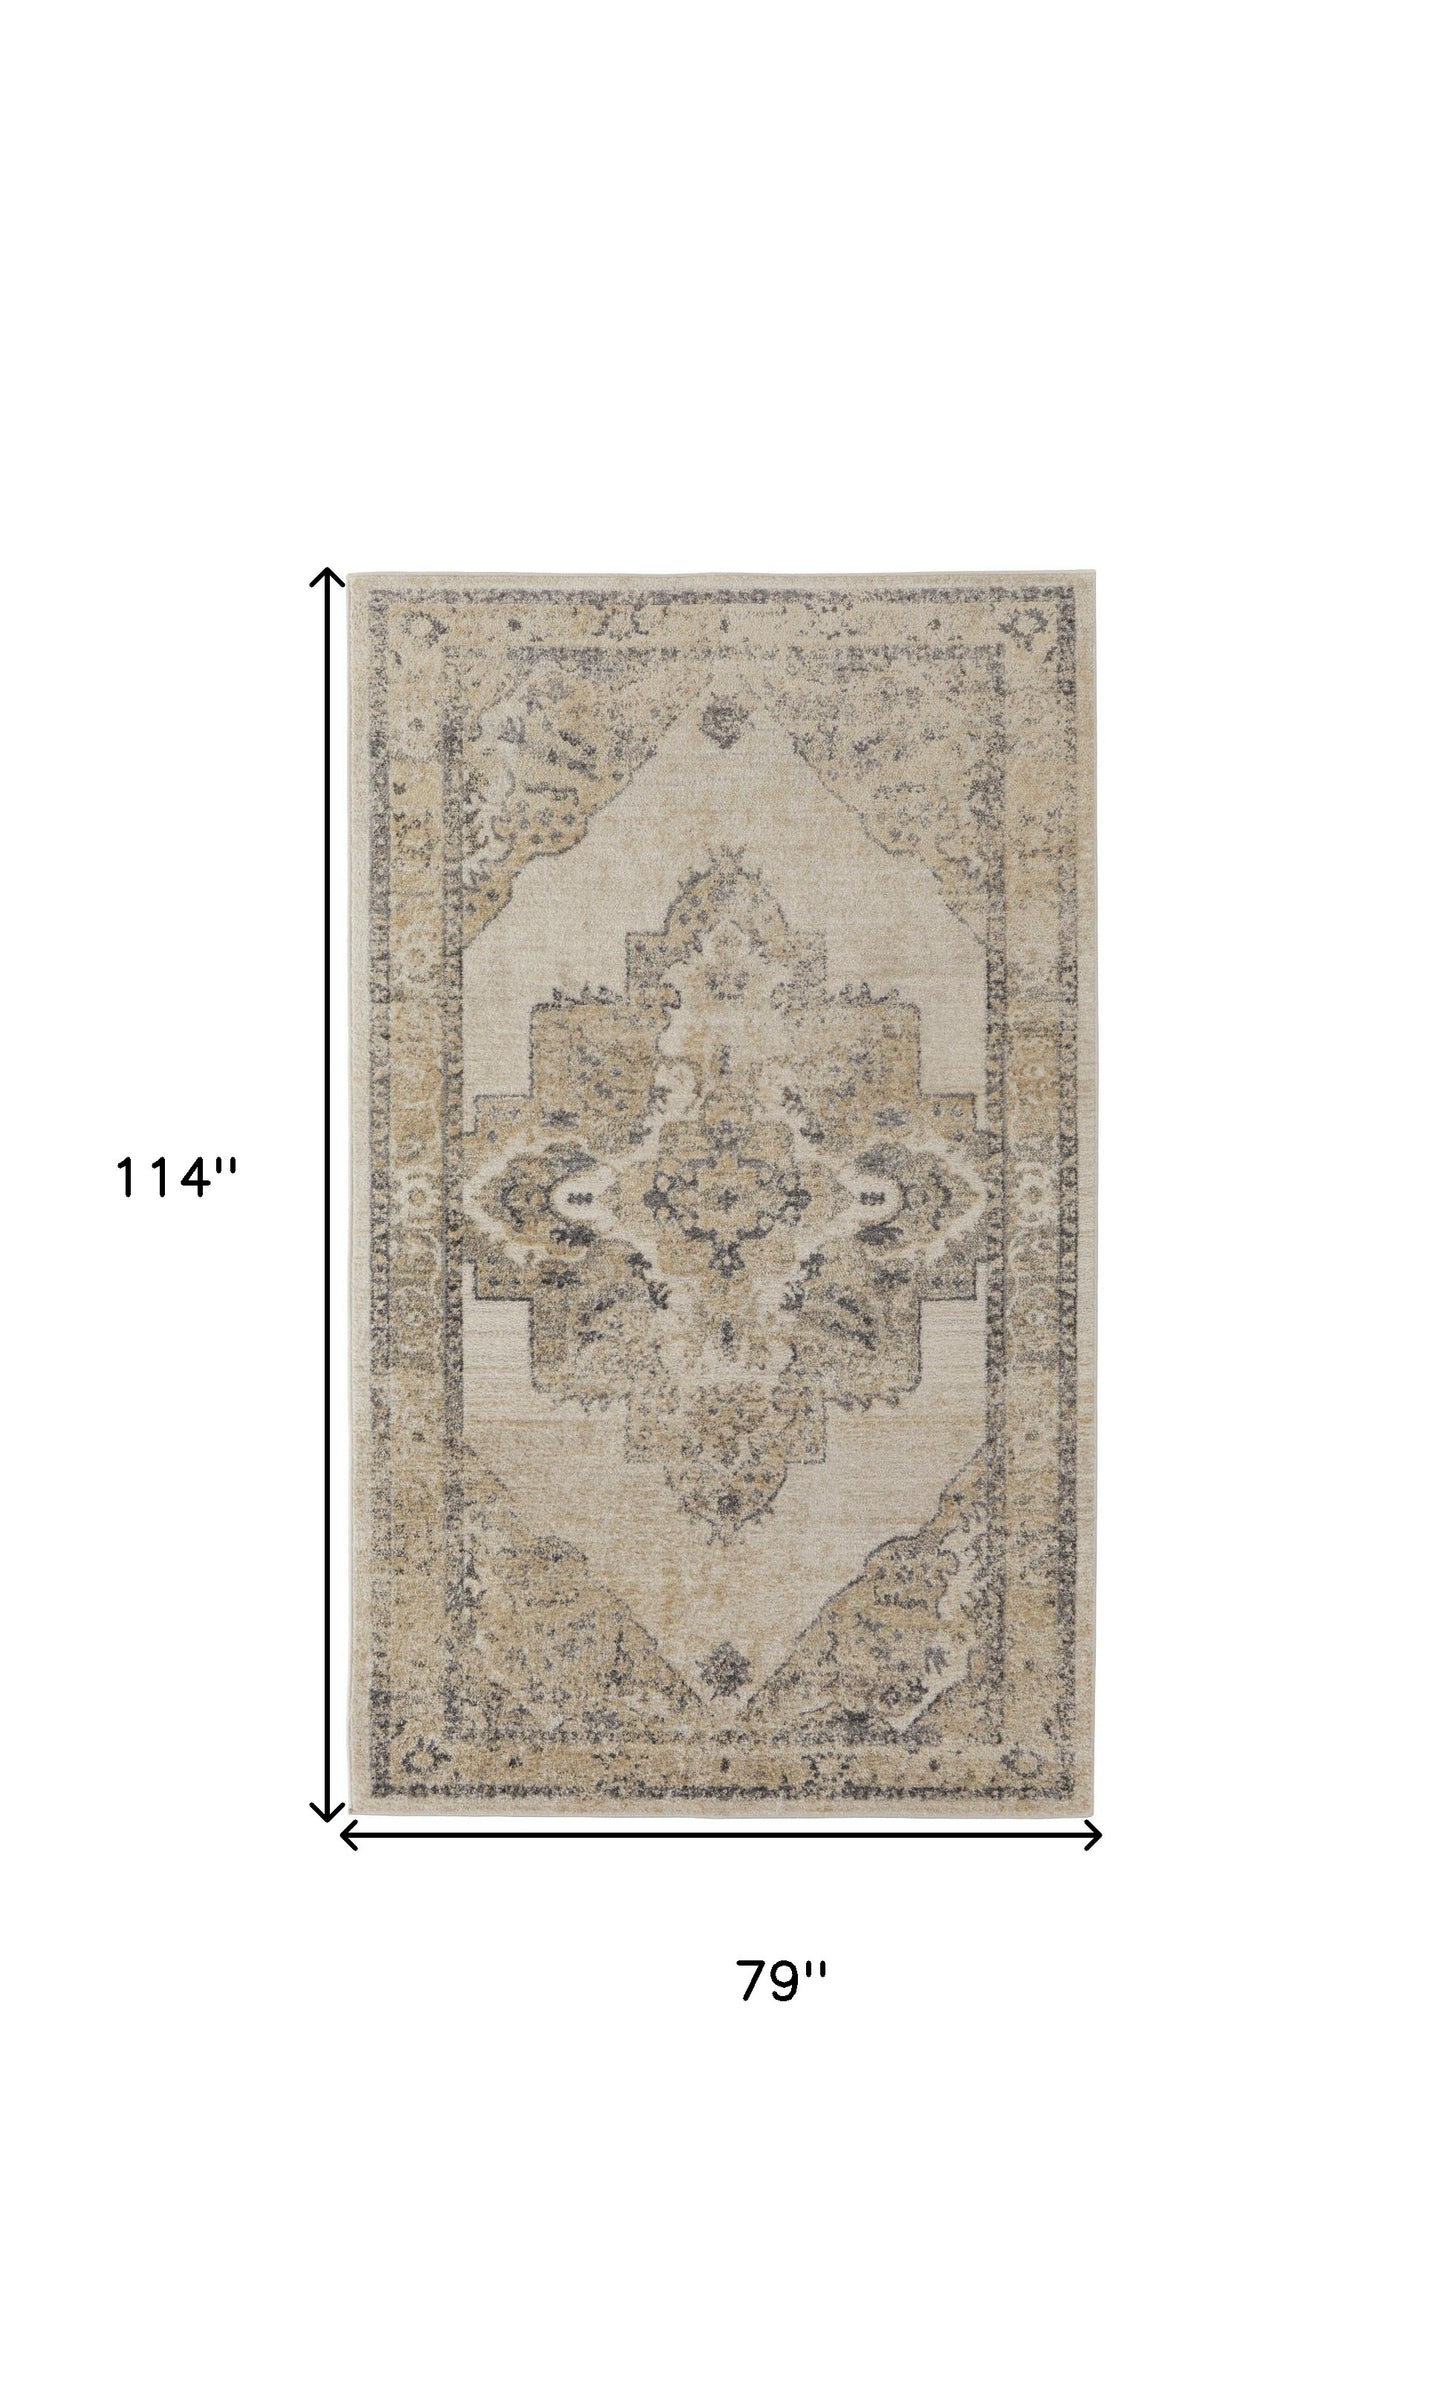 8' X 10' Blue And Ivory Floral Power Loom Distressed Area Rug